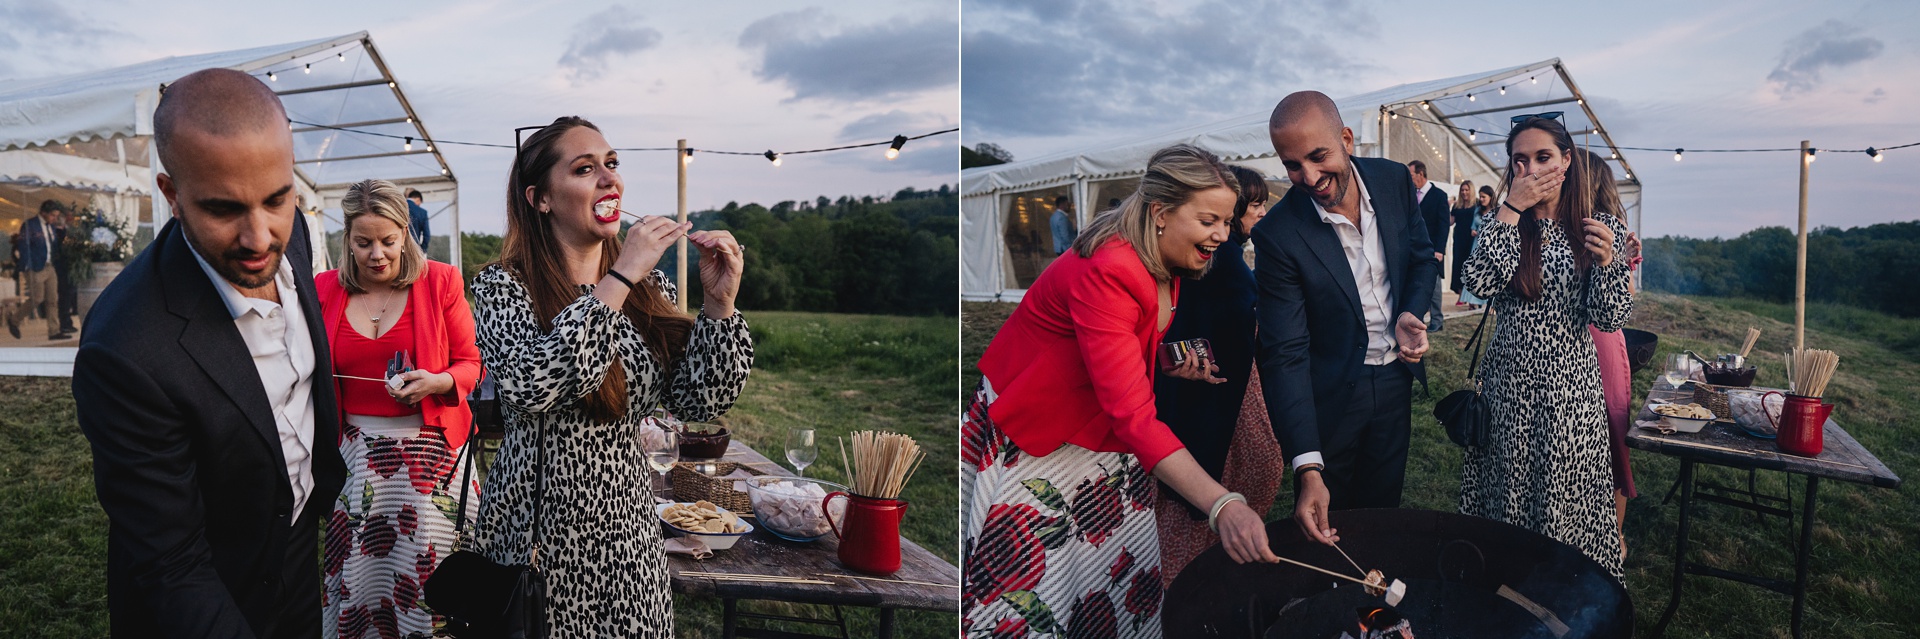 Wedding guests toasting marshmallows and laughing together